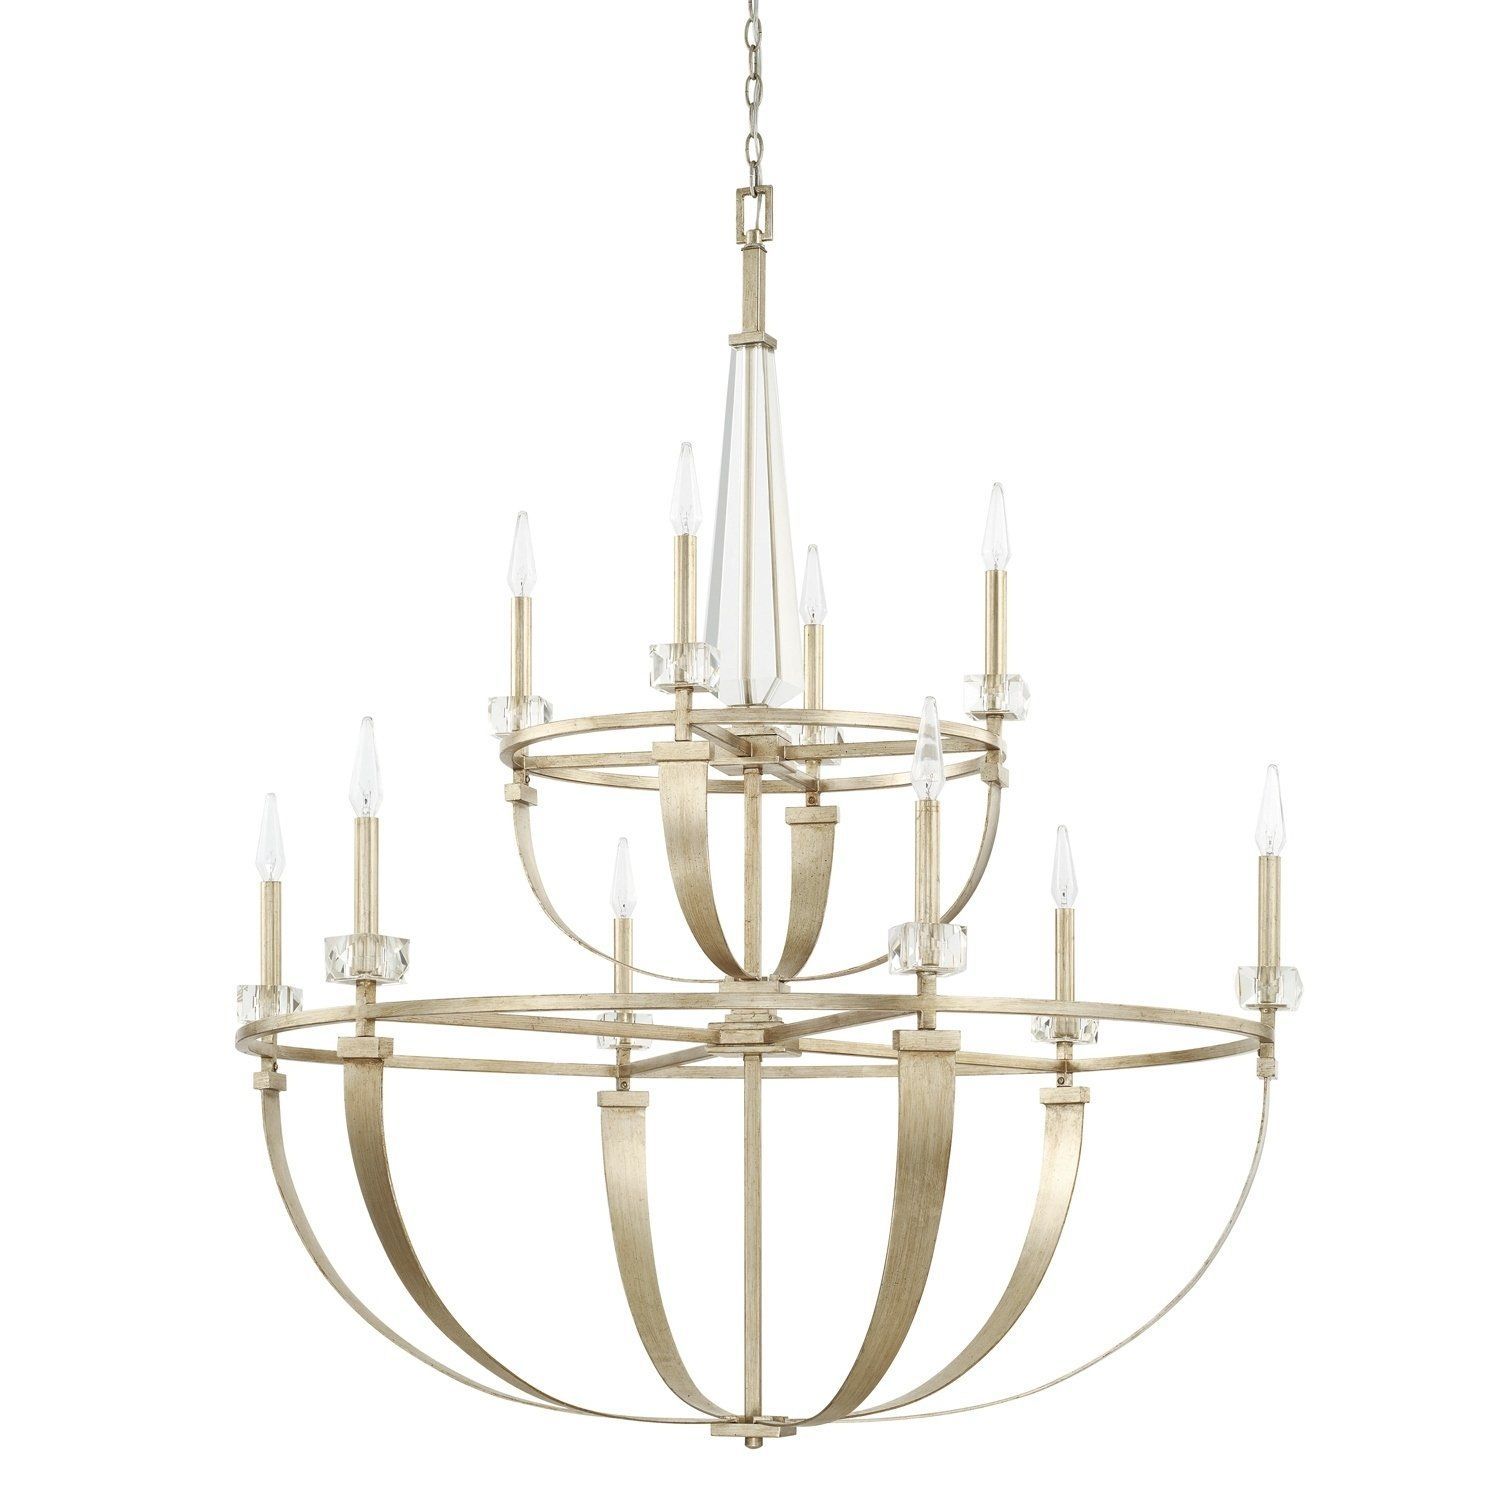 Ceiling Lights | Chandelier Ceiling Lights, Capital Within Winter Gold Chandeliers (View 9 of 15)